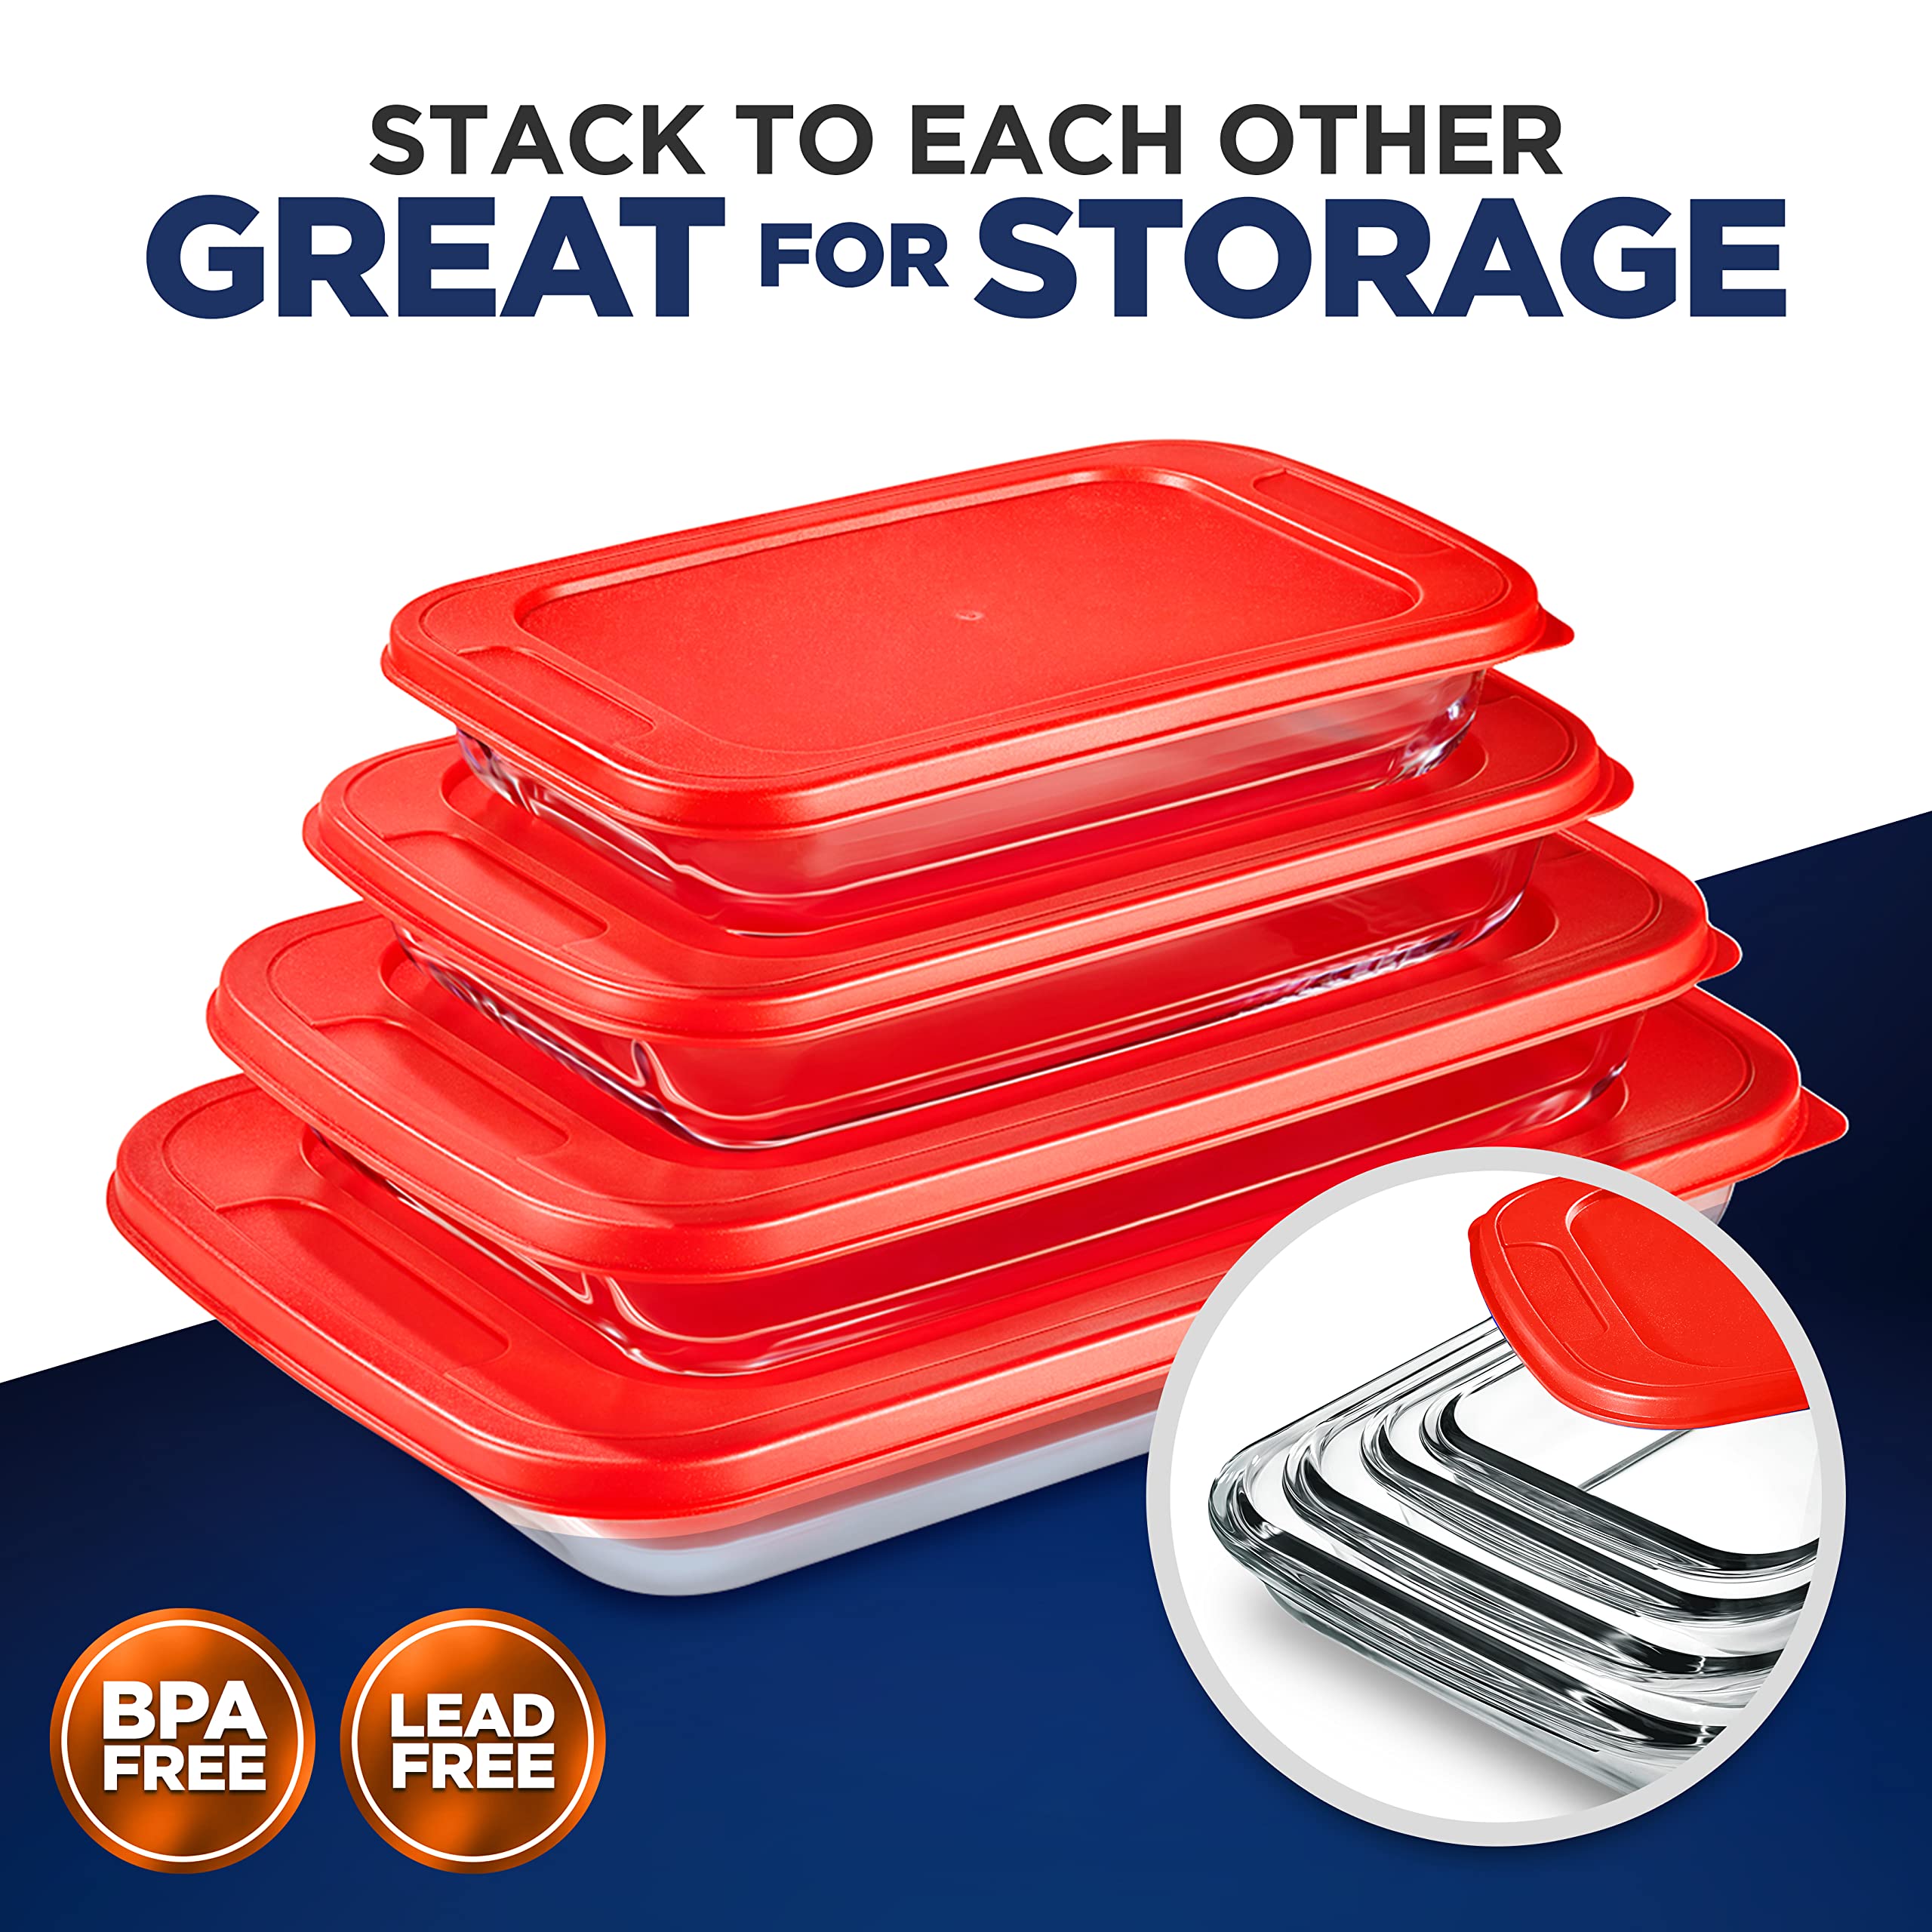 NutriChef 8-Piece Glass Bakeware Set - Glass Rectangular Baking Dishes with Red PE Lids, Ideal for Freezer-to-Oven Cooking, Casseroles, and Easy Food Storage, Stackable Design